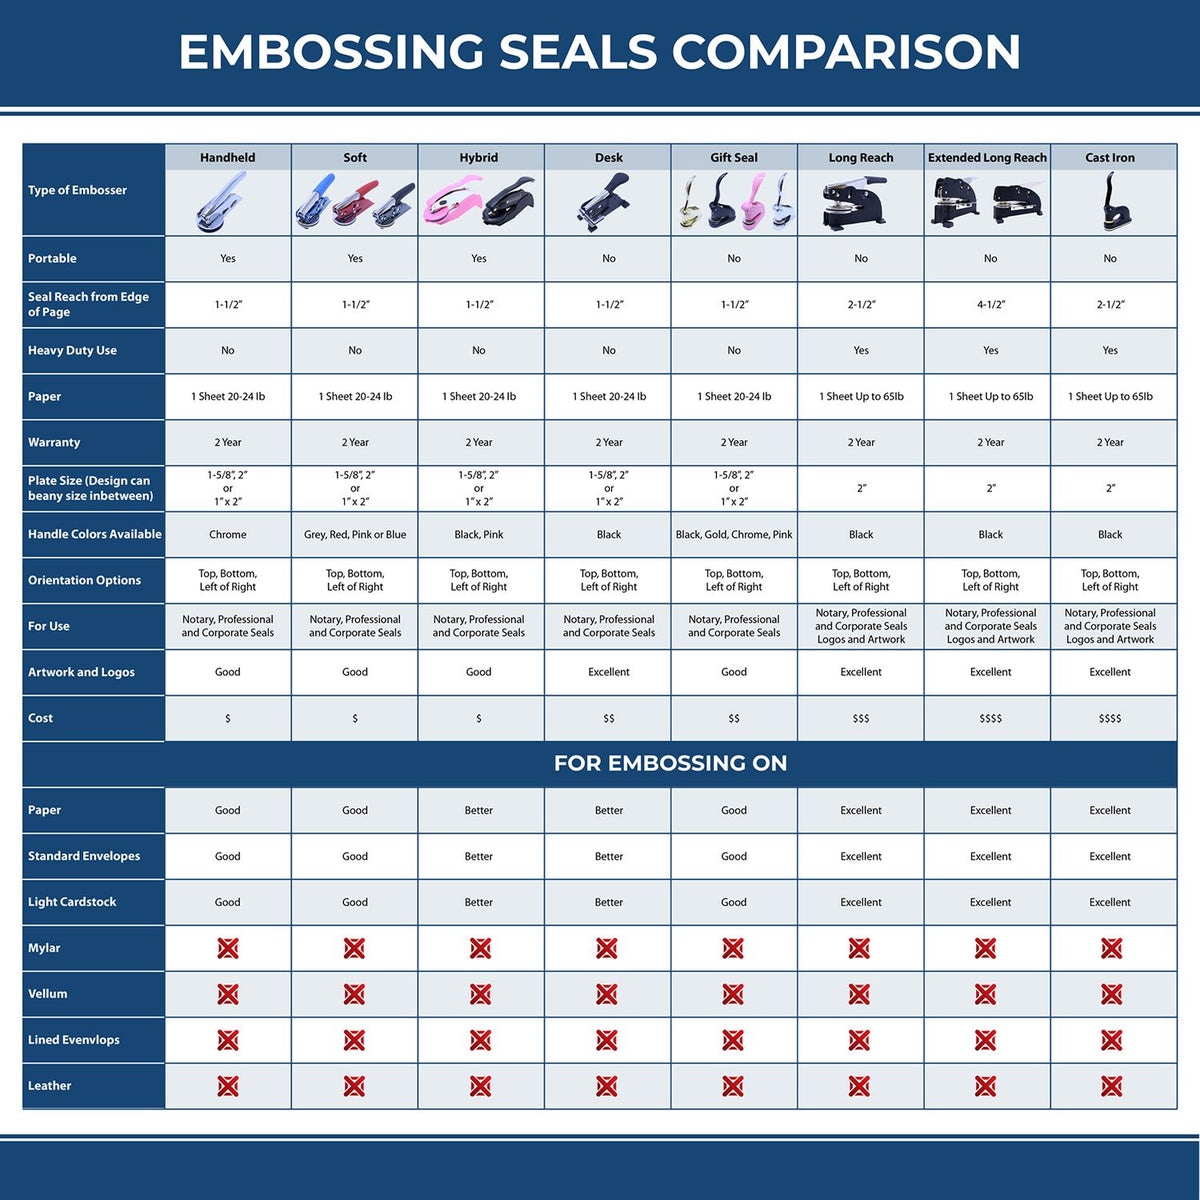 A comparison chart for the different types of mount models available for the Heavy Duty Cast Iron North Dakota Geologist Seal Embosser